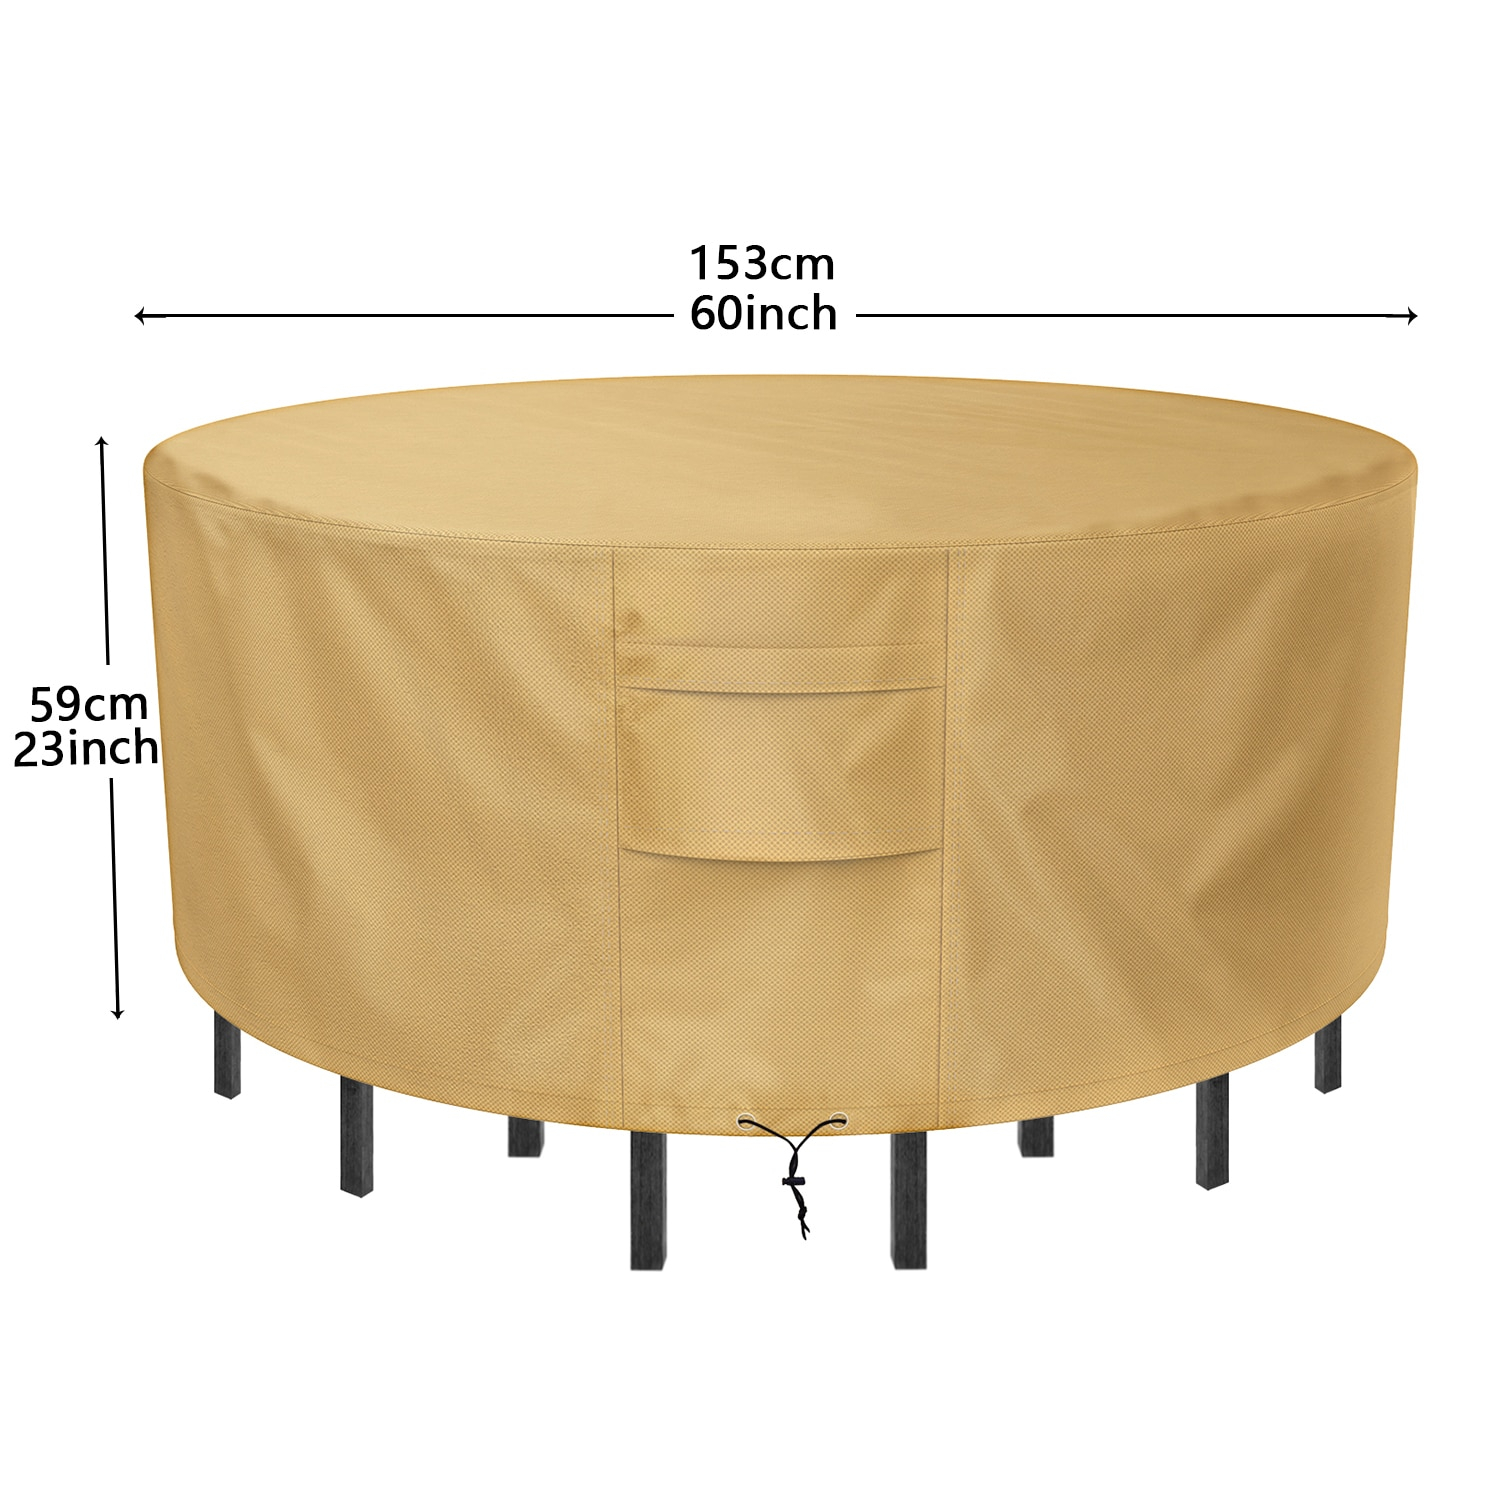 Us 3279 20 Offranton Sunkorto Patio Table Cover Waterproof Wear Resistant Patio Furniture Chair Covers 60 Inch Diameter Light Brown In Tablecloths intended for proportions 1500 X 1500